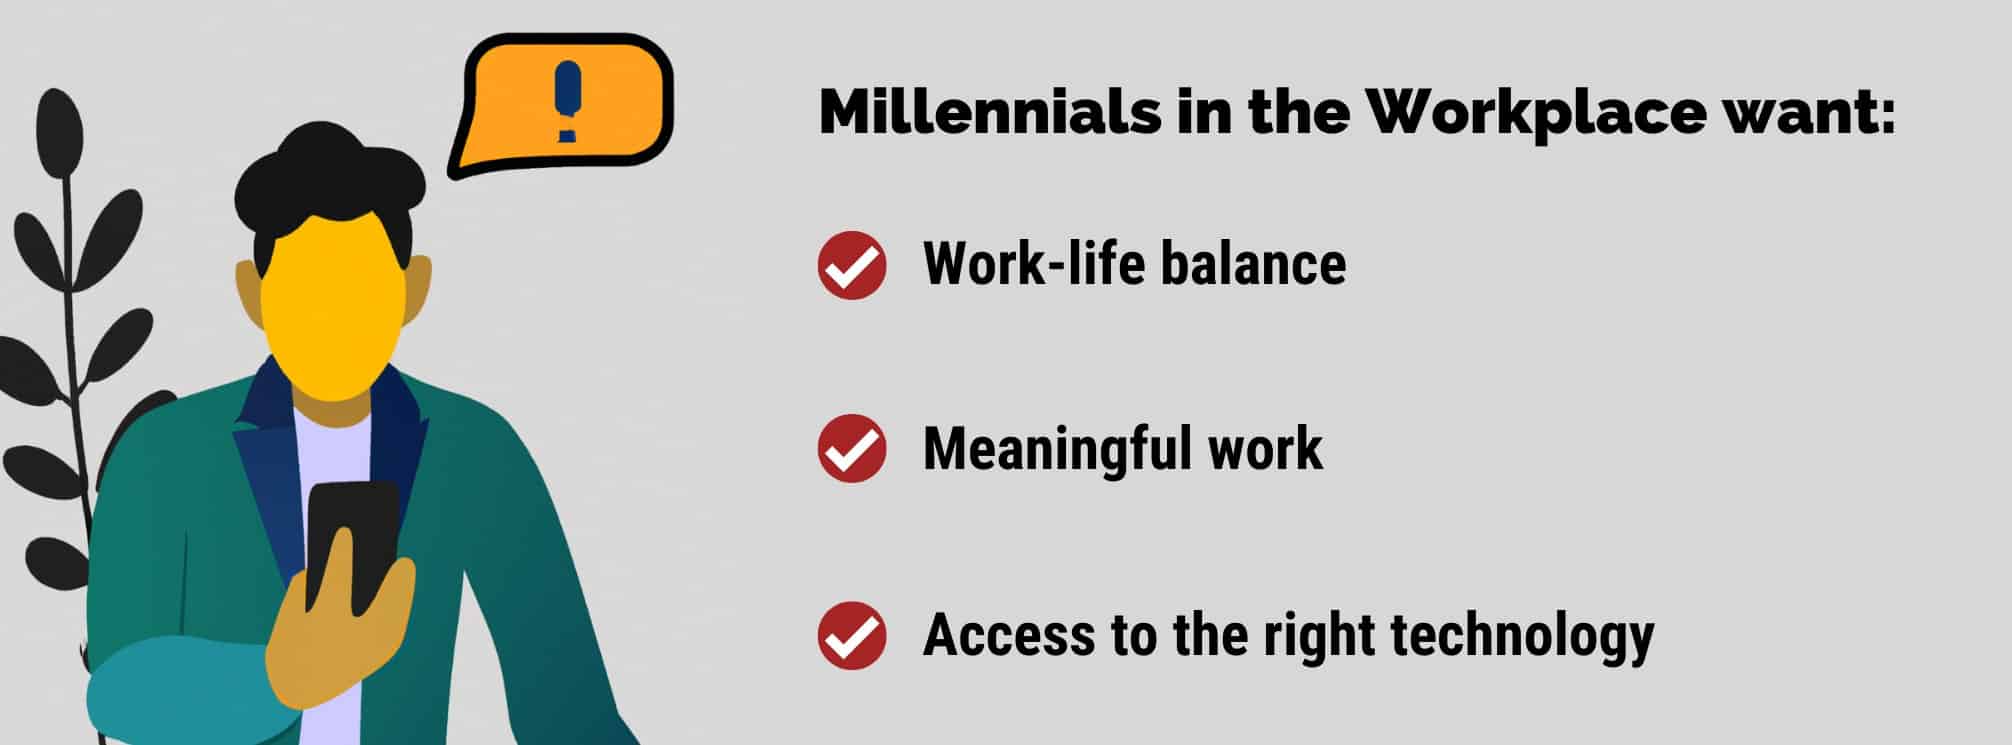 Illustration of a millennial using their phone with the following text: Millennials in the workplace want:
1. Work-life balance
2. Meaningful work
3. Access to the right technology